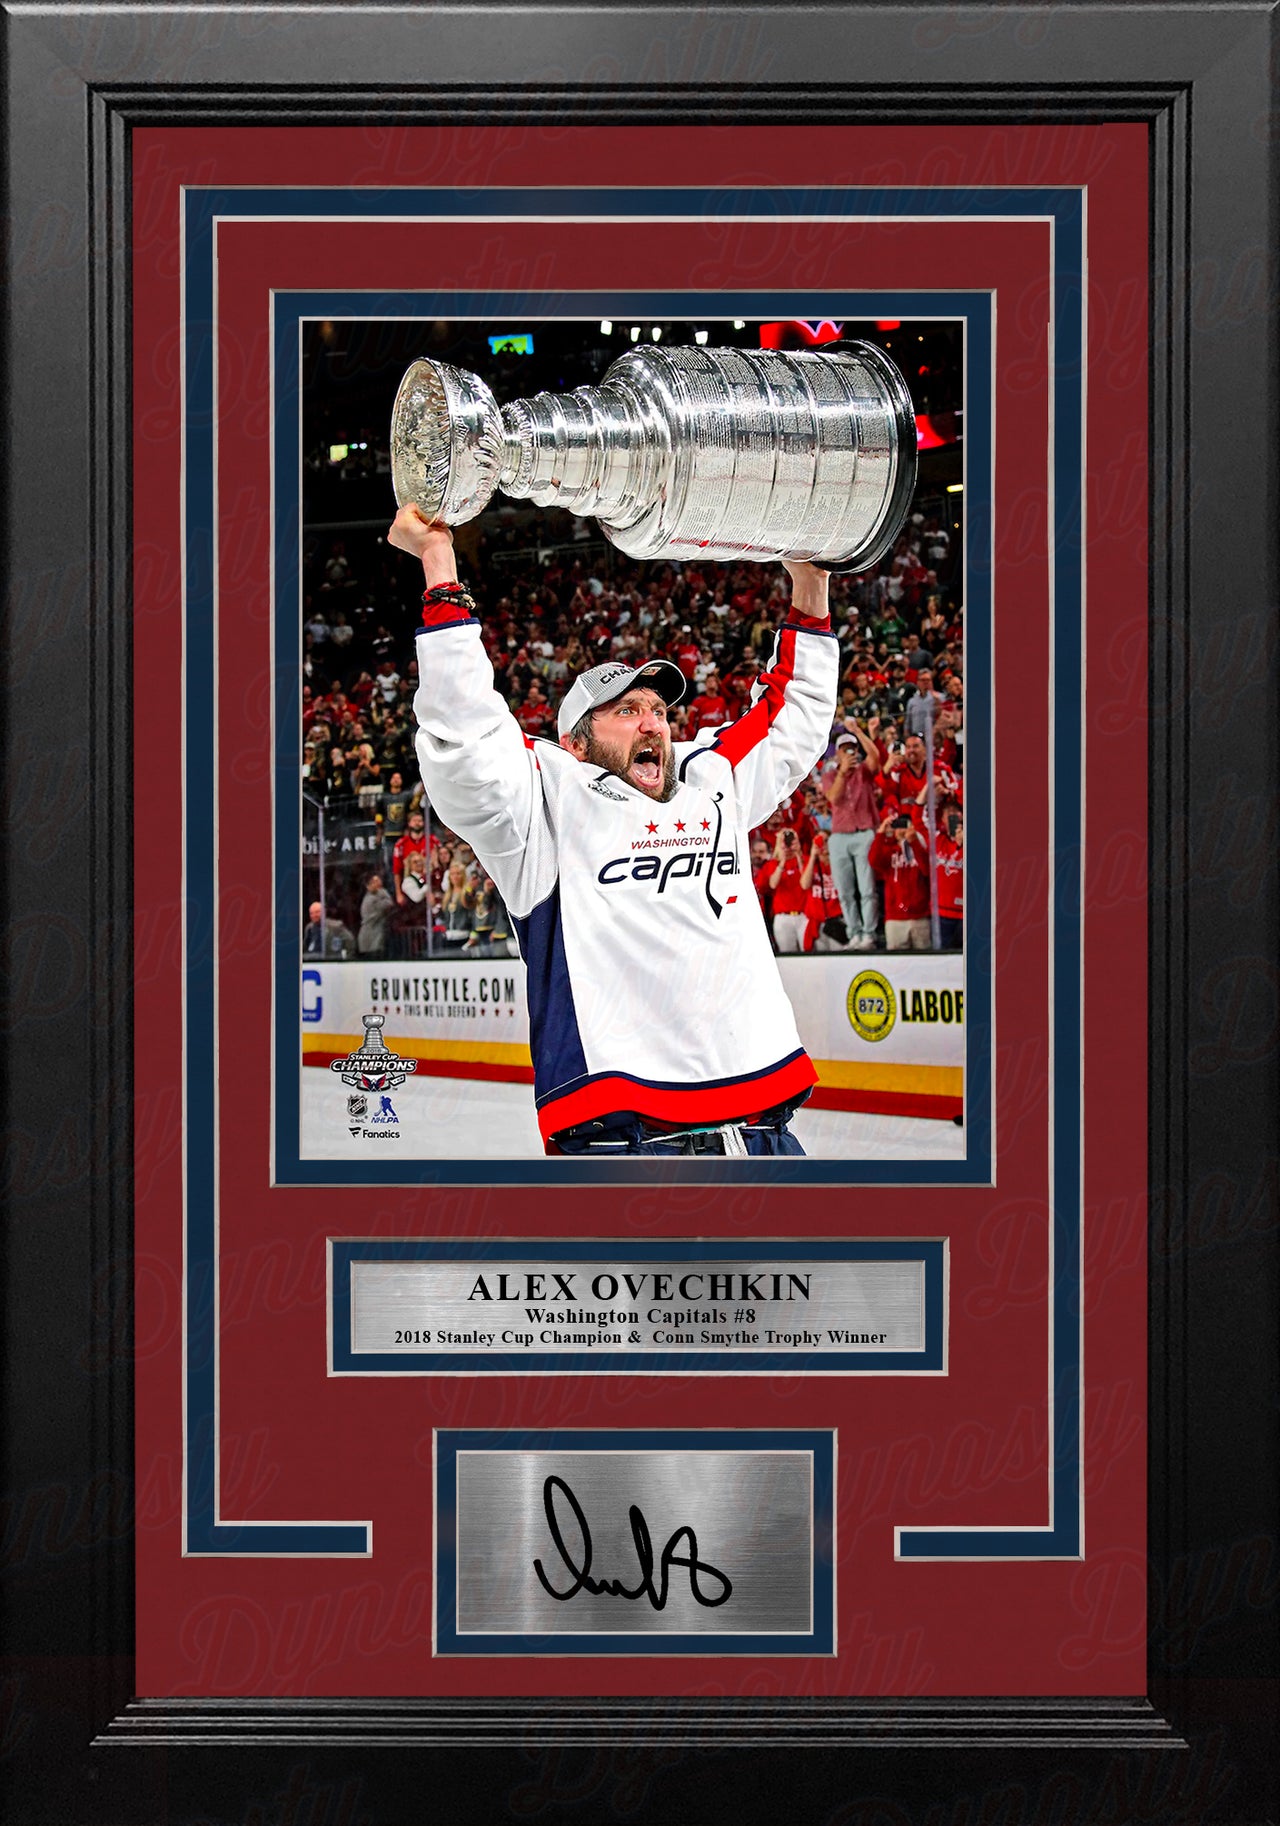 Alex Ovechkin Washington Capitals 2018 Stanley Cup 8x10 Framed Hockey Photo with Engraved Autograph - Dynasty Sports & Framing 